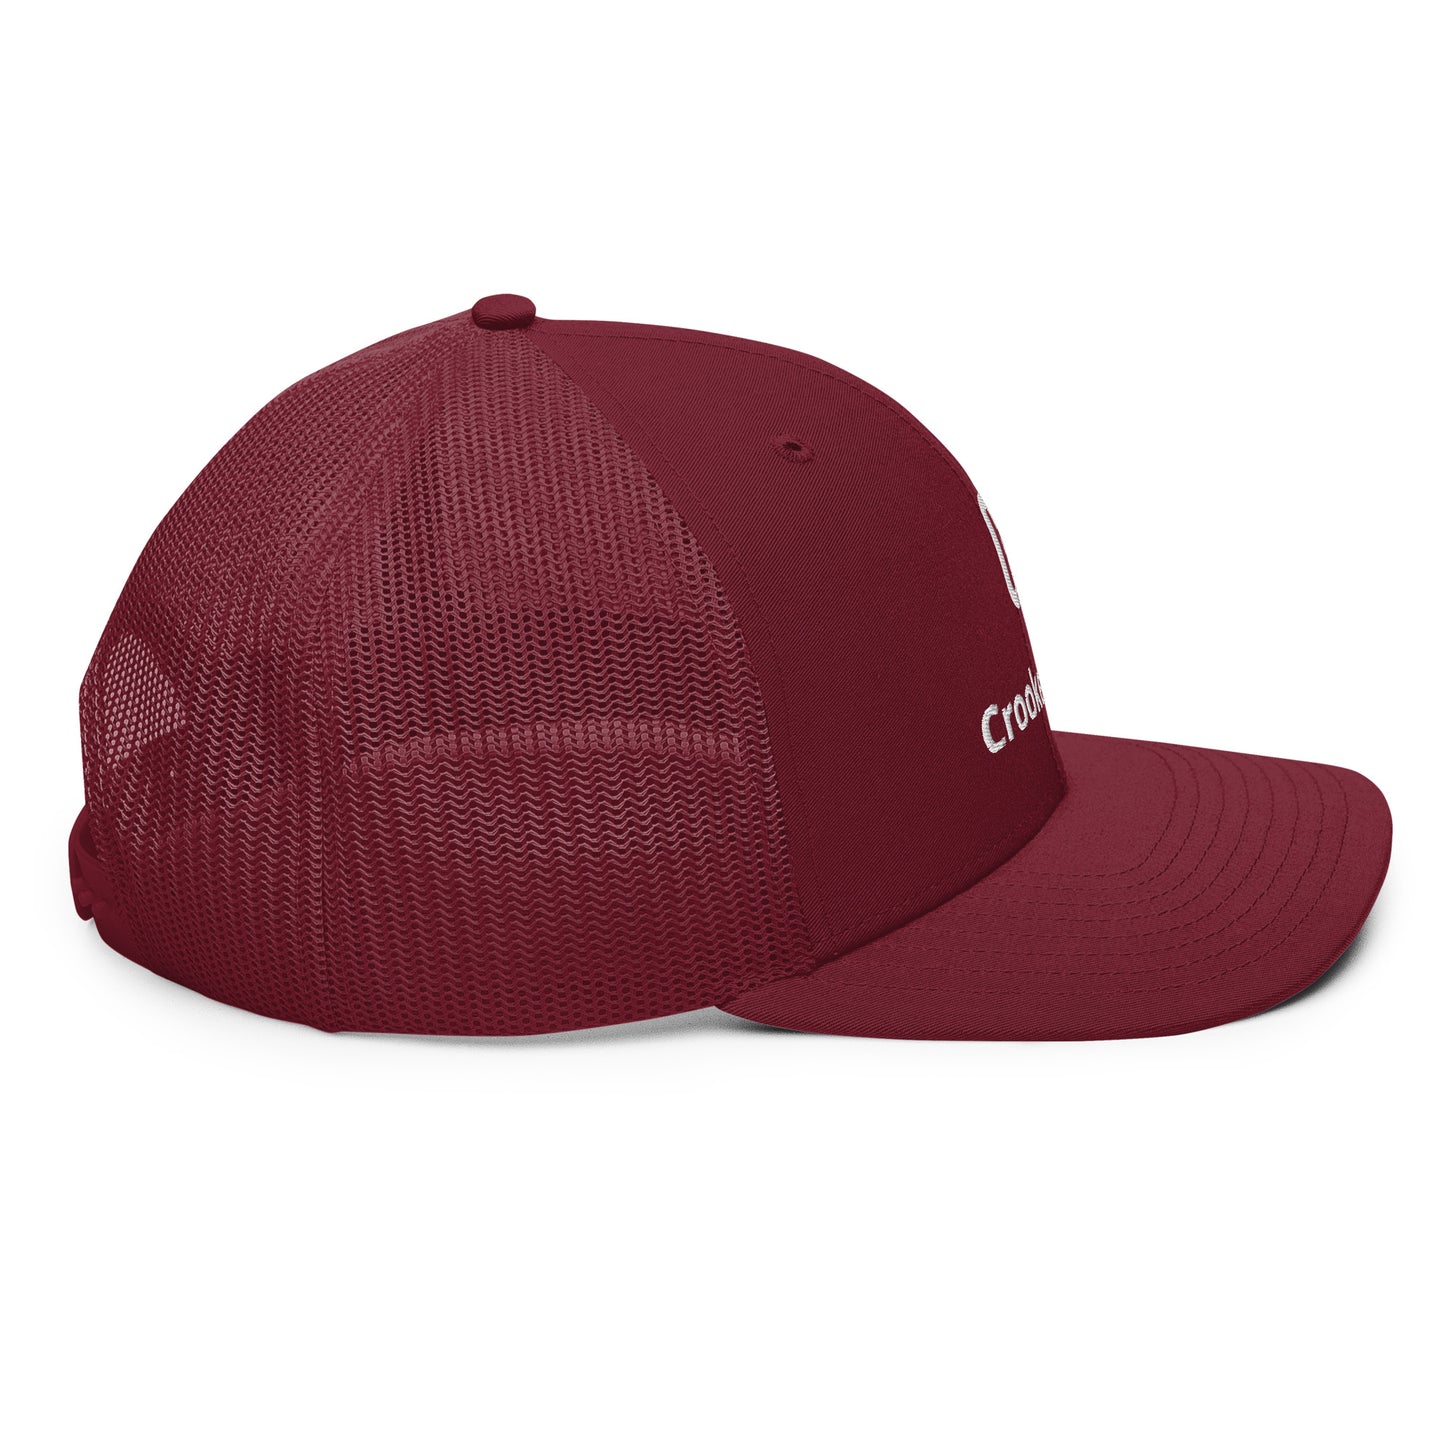 Columbia CSC trucker hat in red